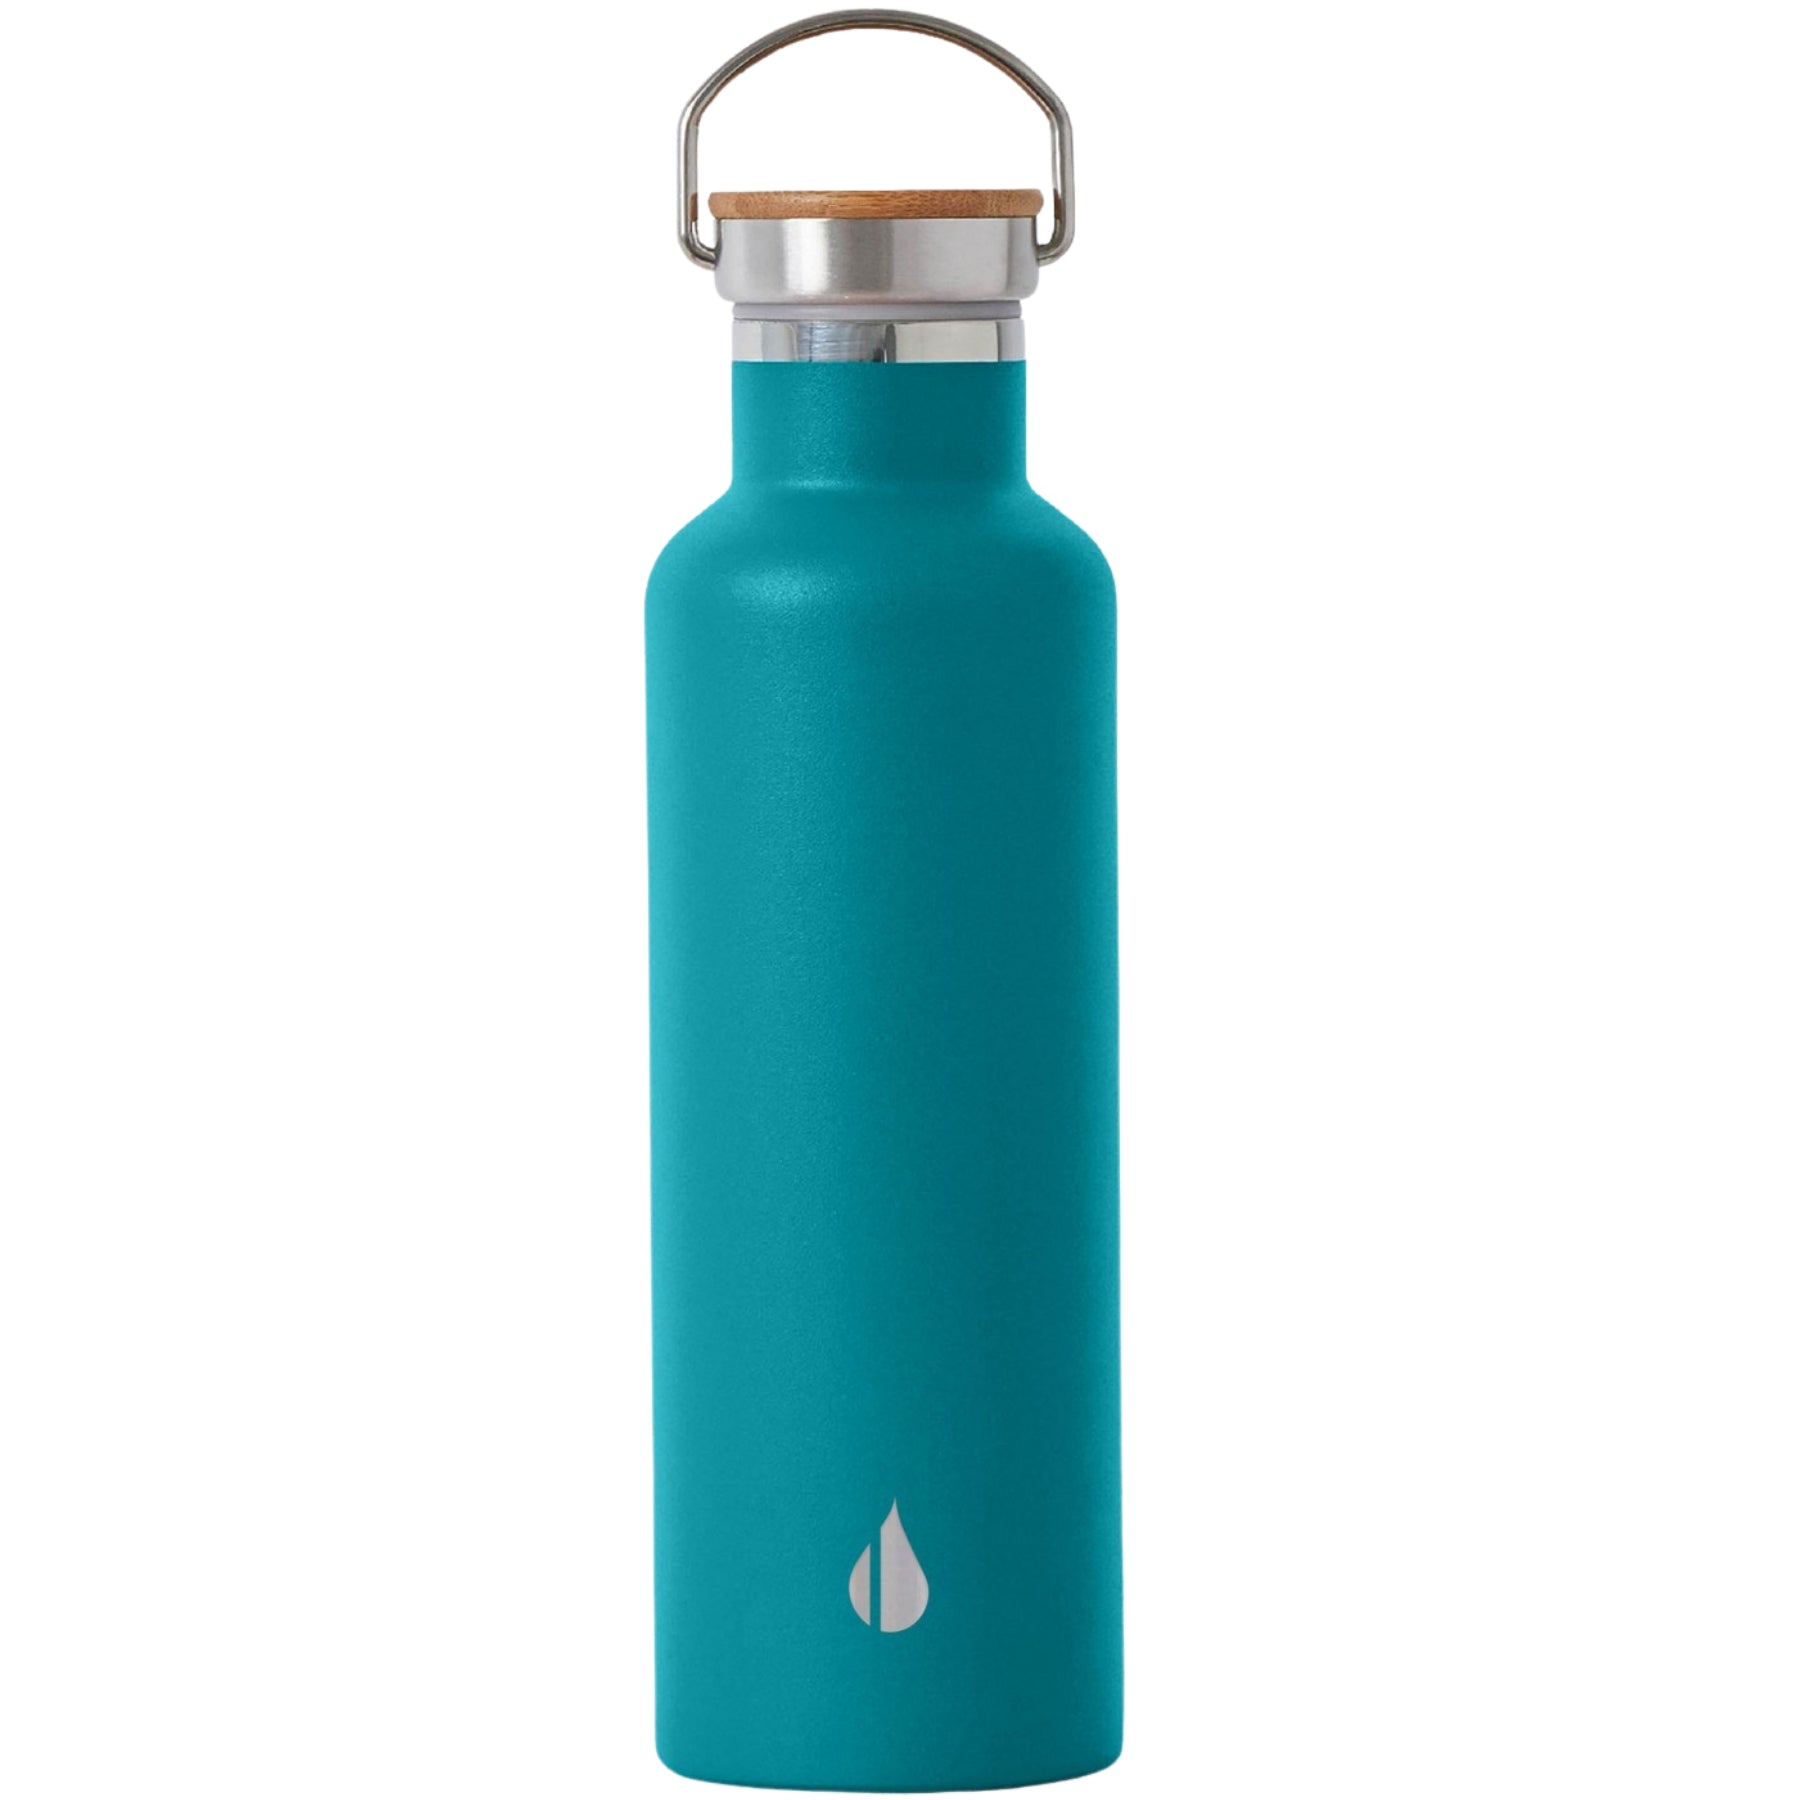 Customizable Elemental® 25 oz Stainless Steel Insulated Bottle in teal